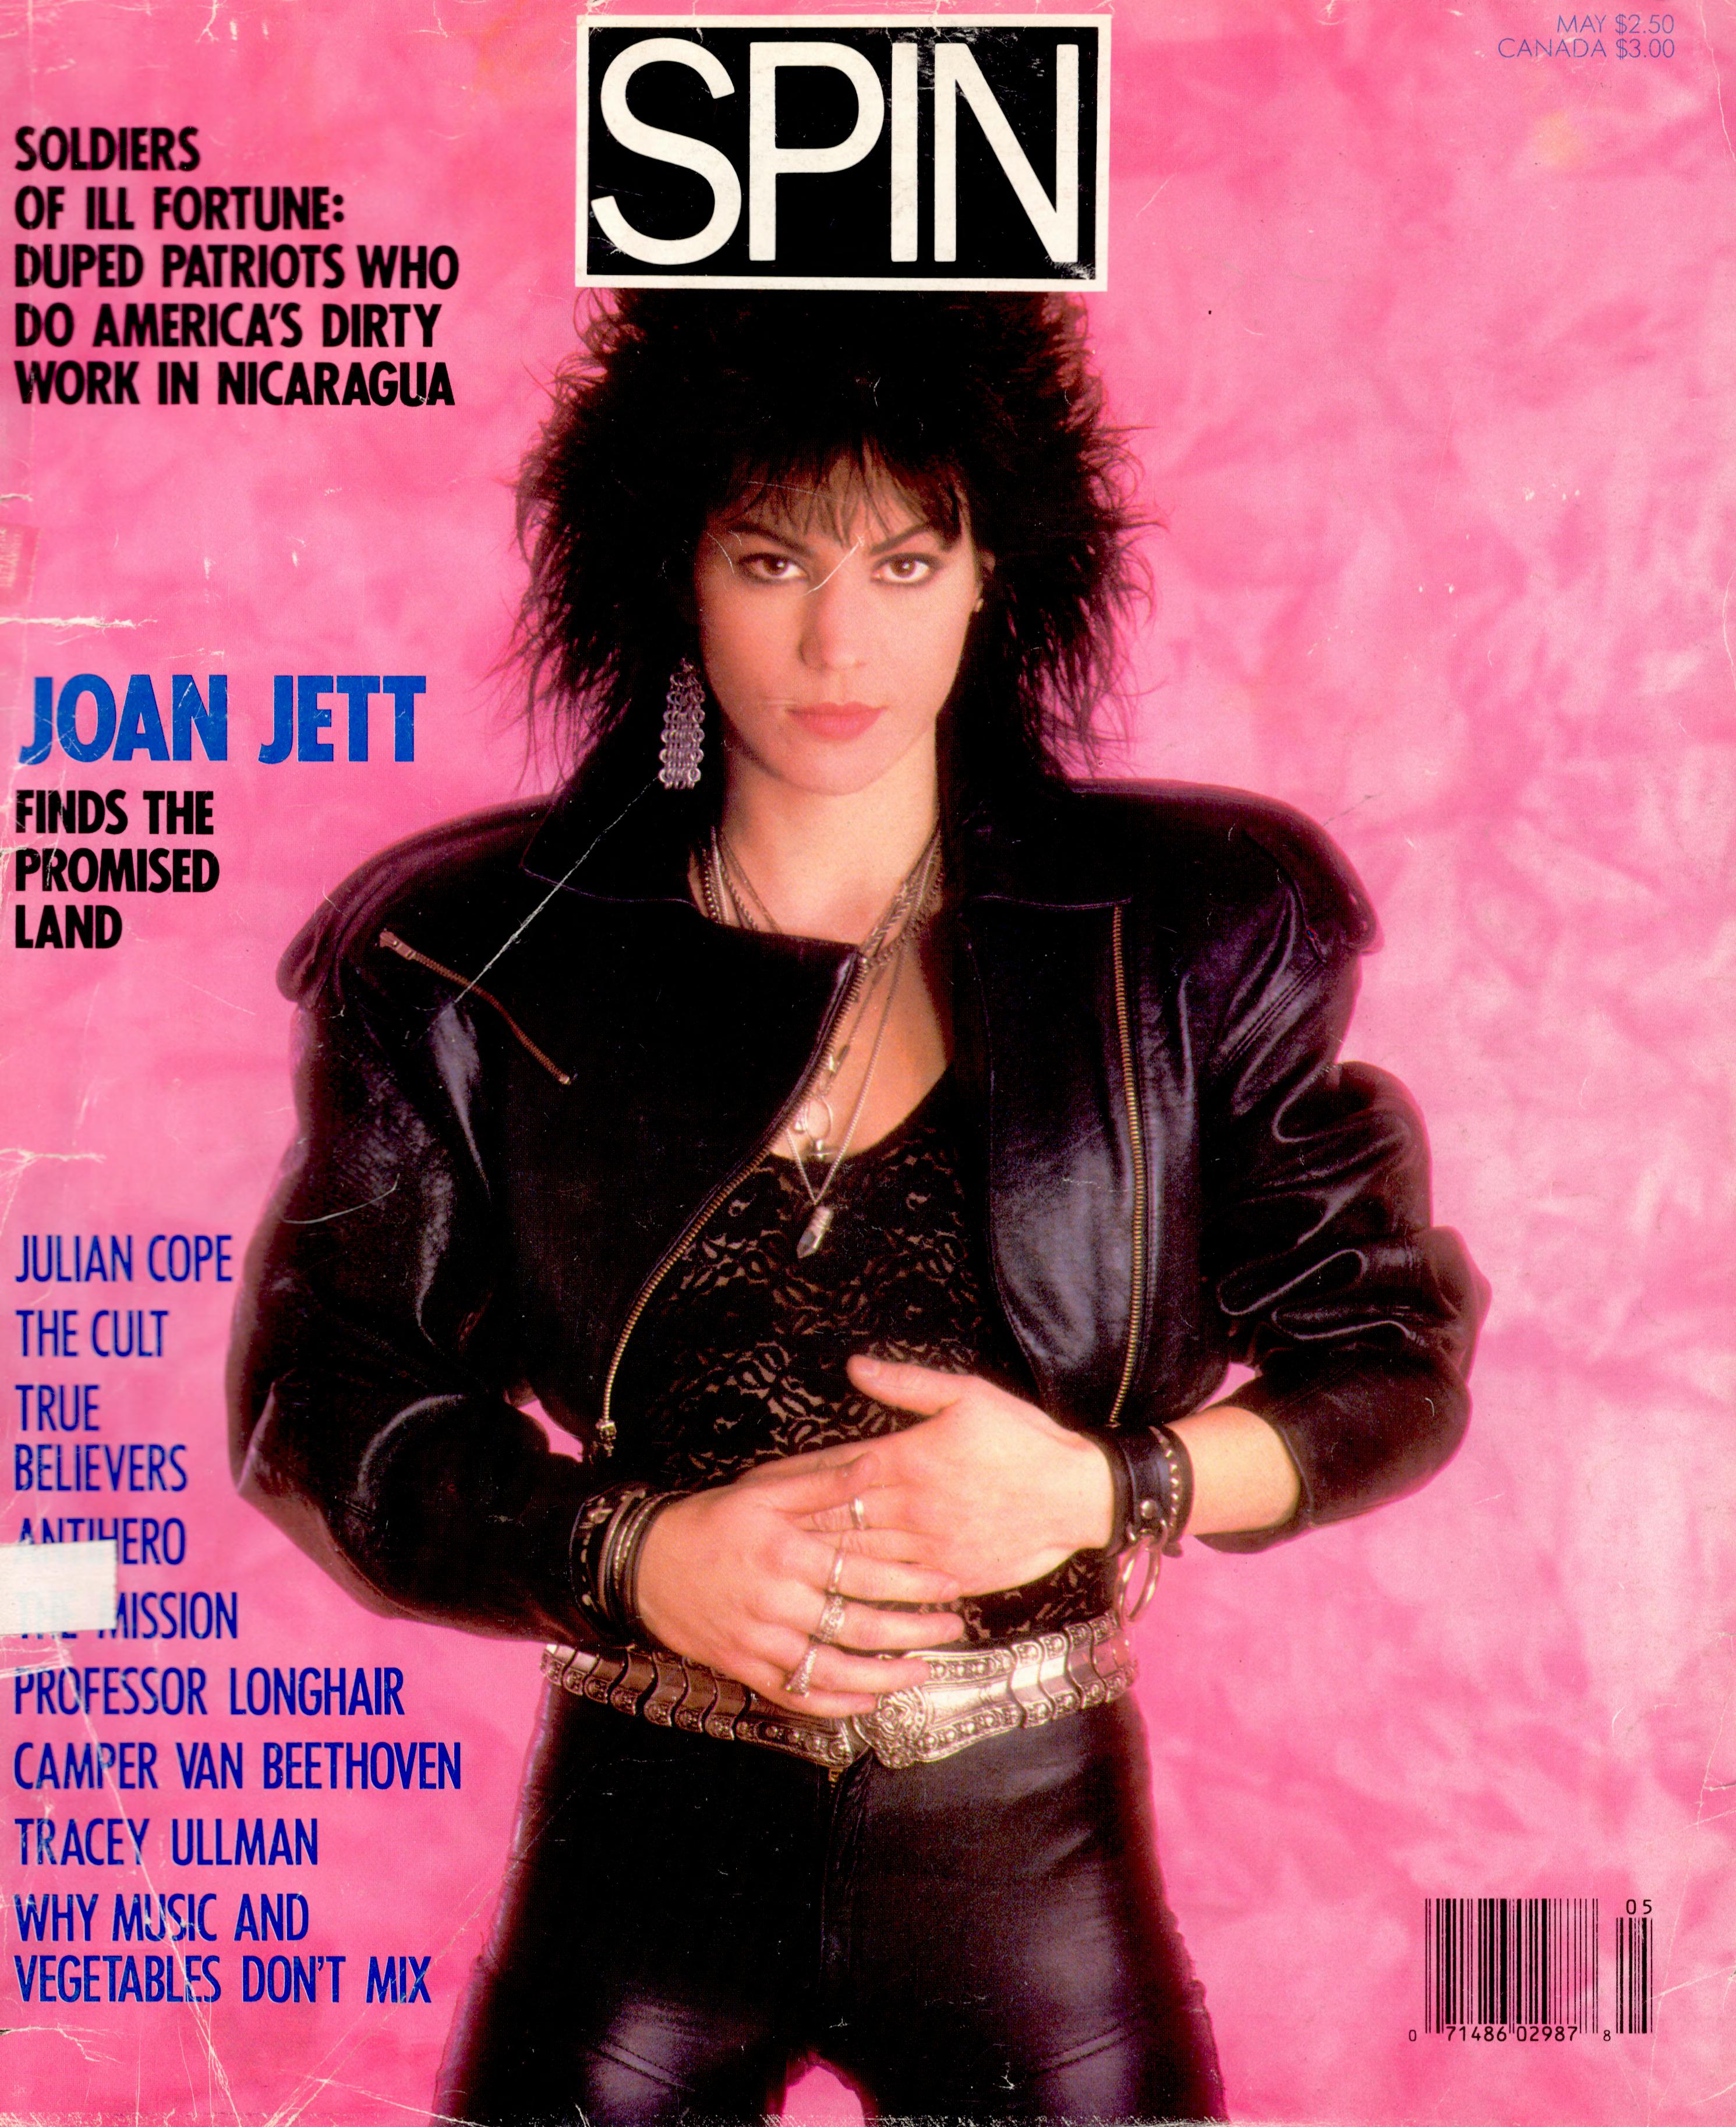 Joan Jett Finds the Promised Land photo